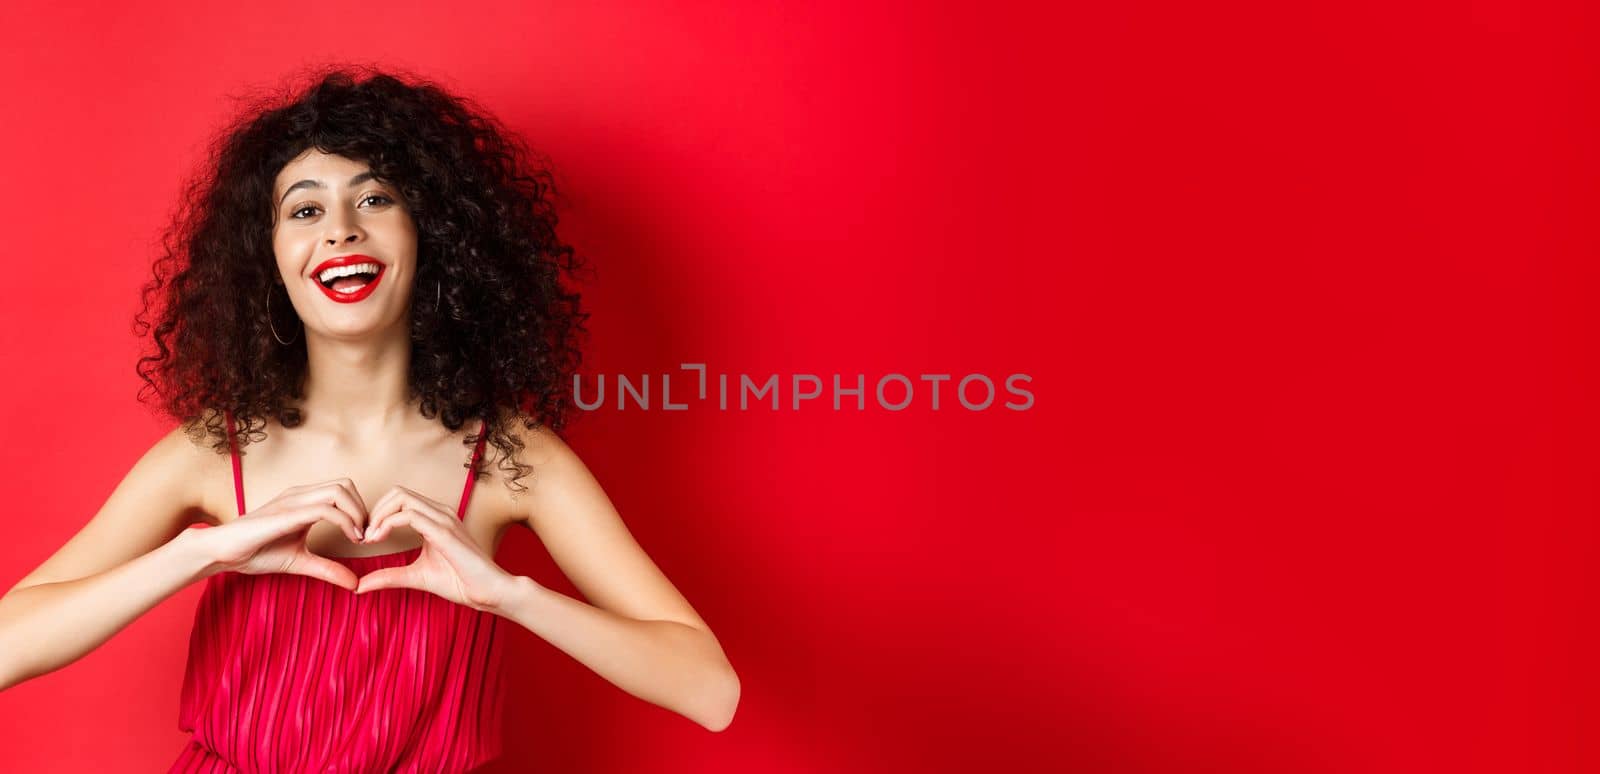 Beautiful woman with curly hair, red dress, showing heart symbol and smiling happy, studio background.